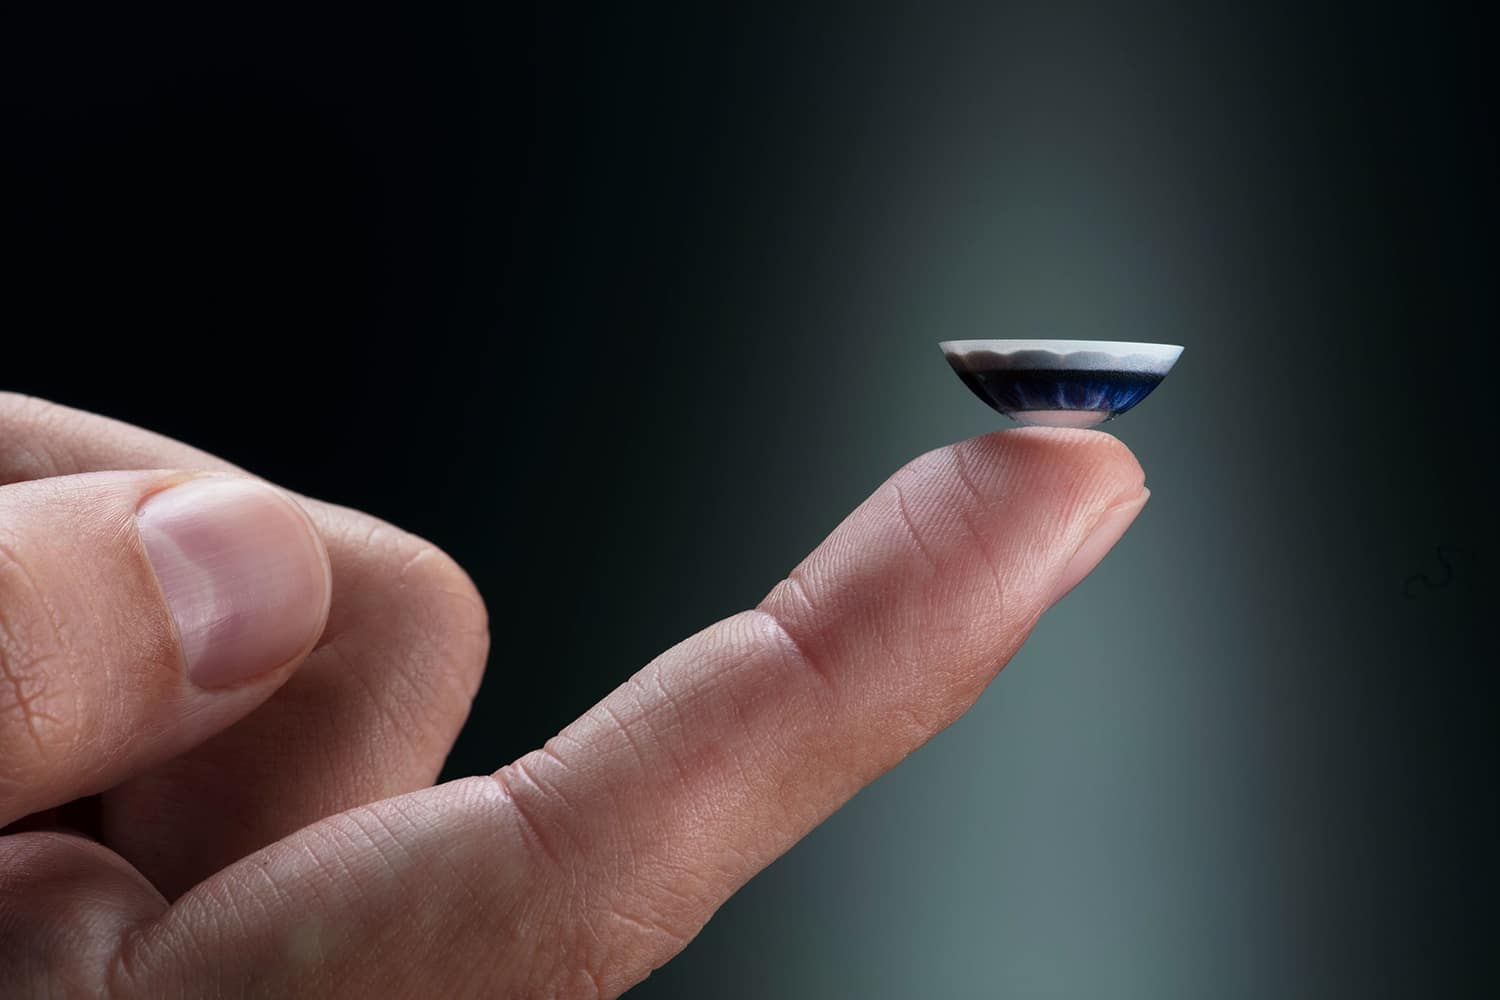 Mojo Vision shows smart contact lenses with an integrated display.